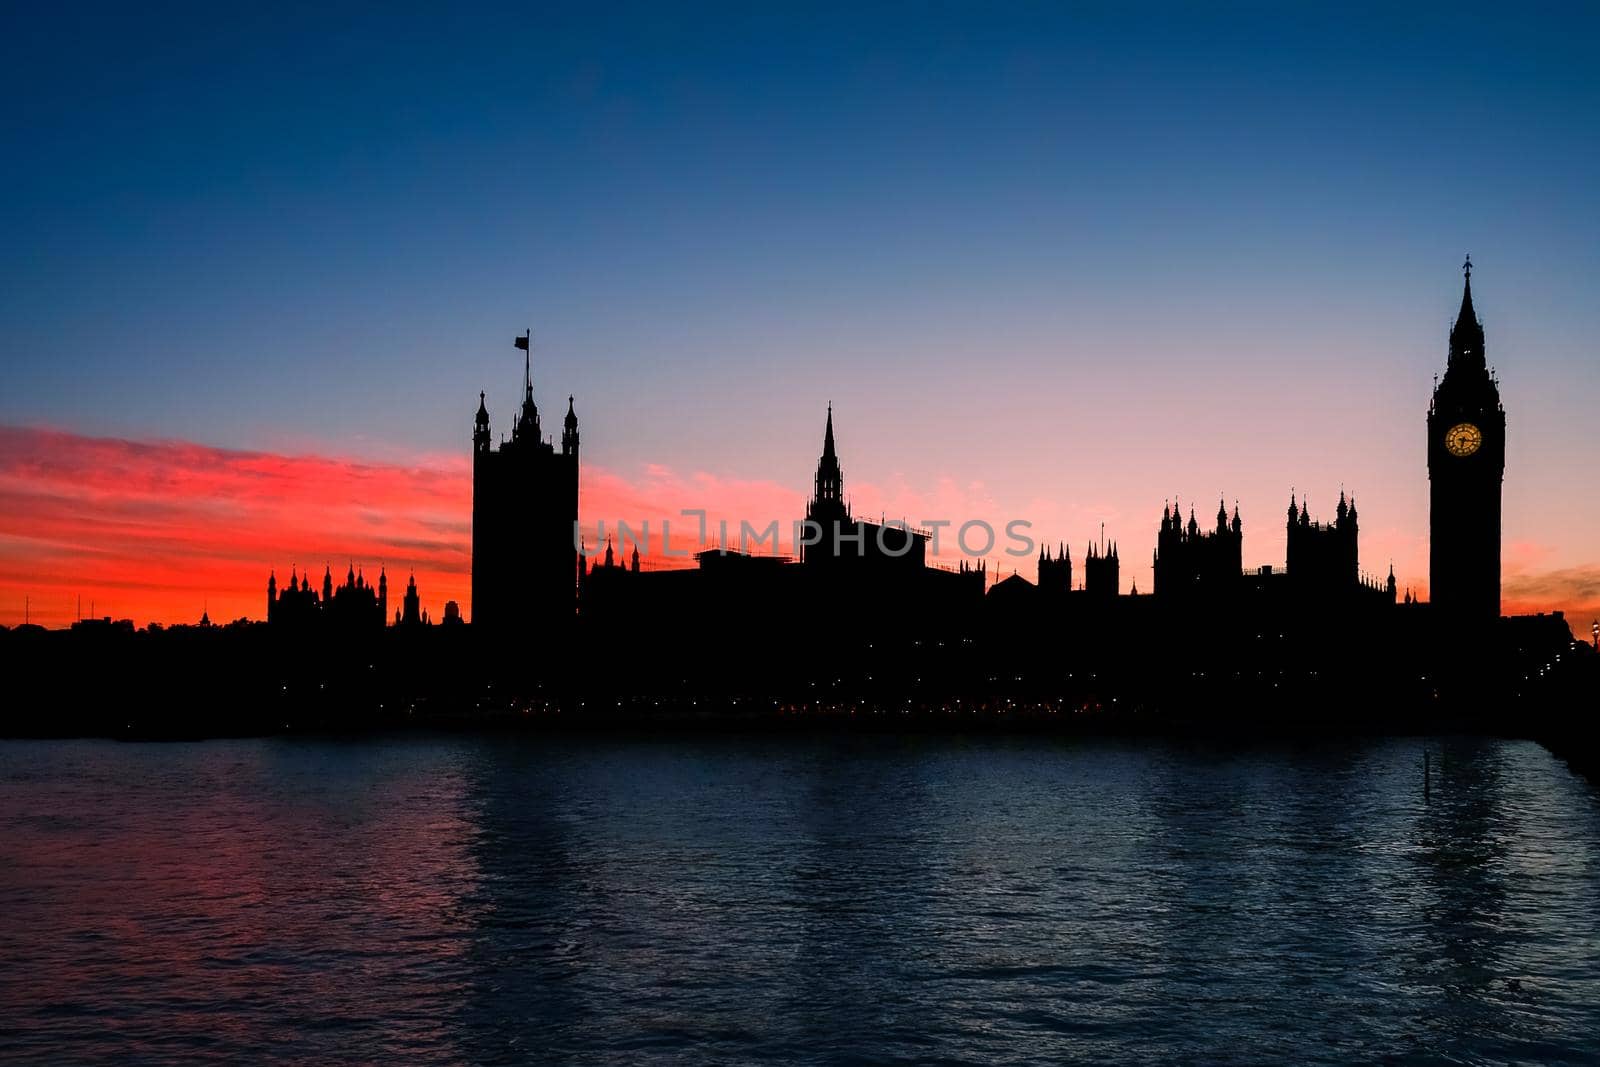 London, England - October 18 2016: Silhouette of Elizabeth Tower, Big Ben, and the Houses of Parliament against a deep orange sunset